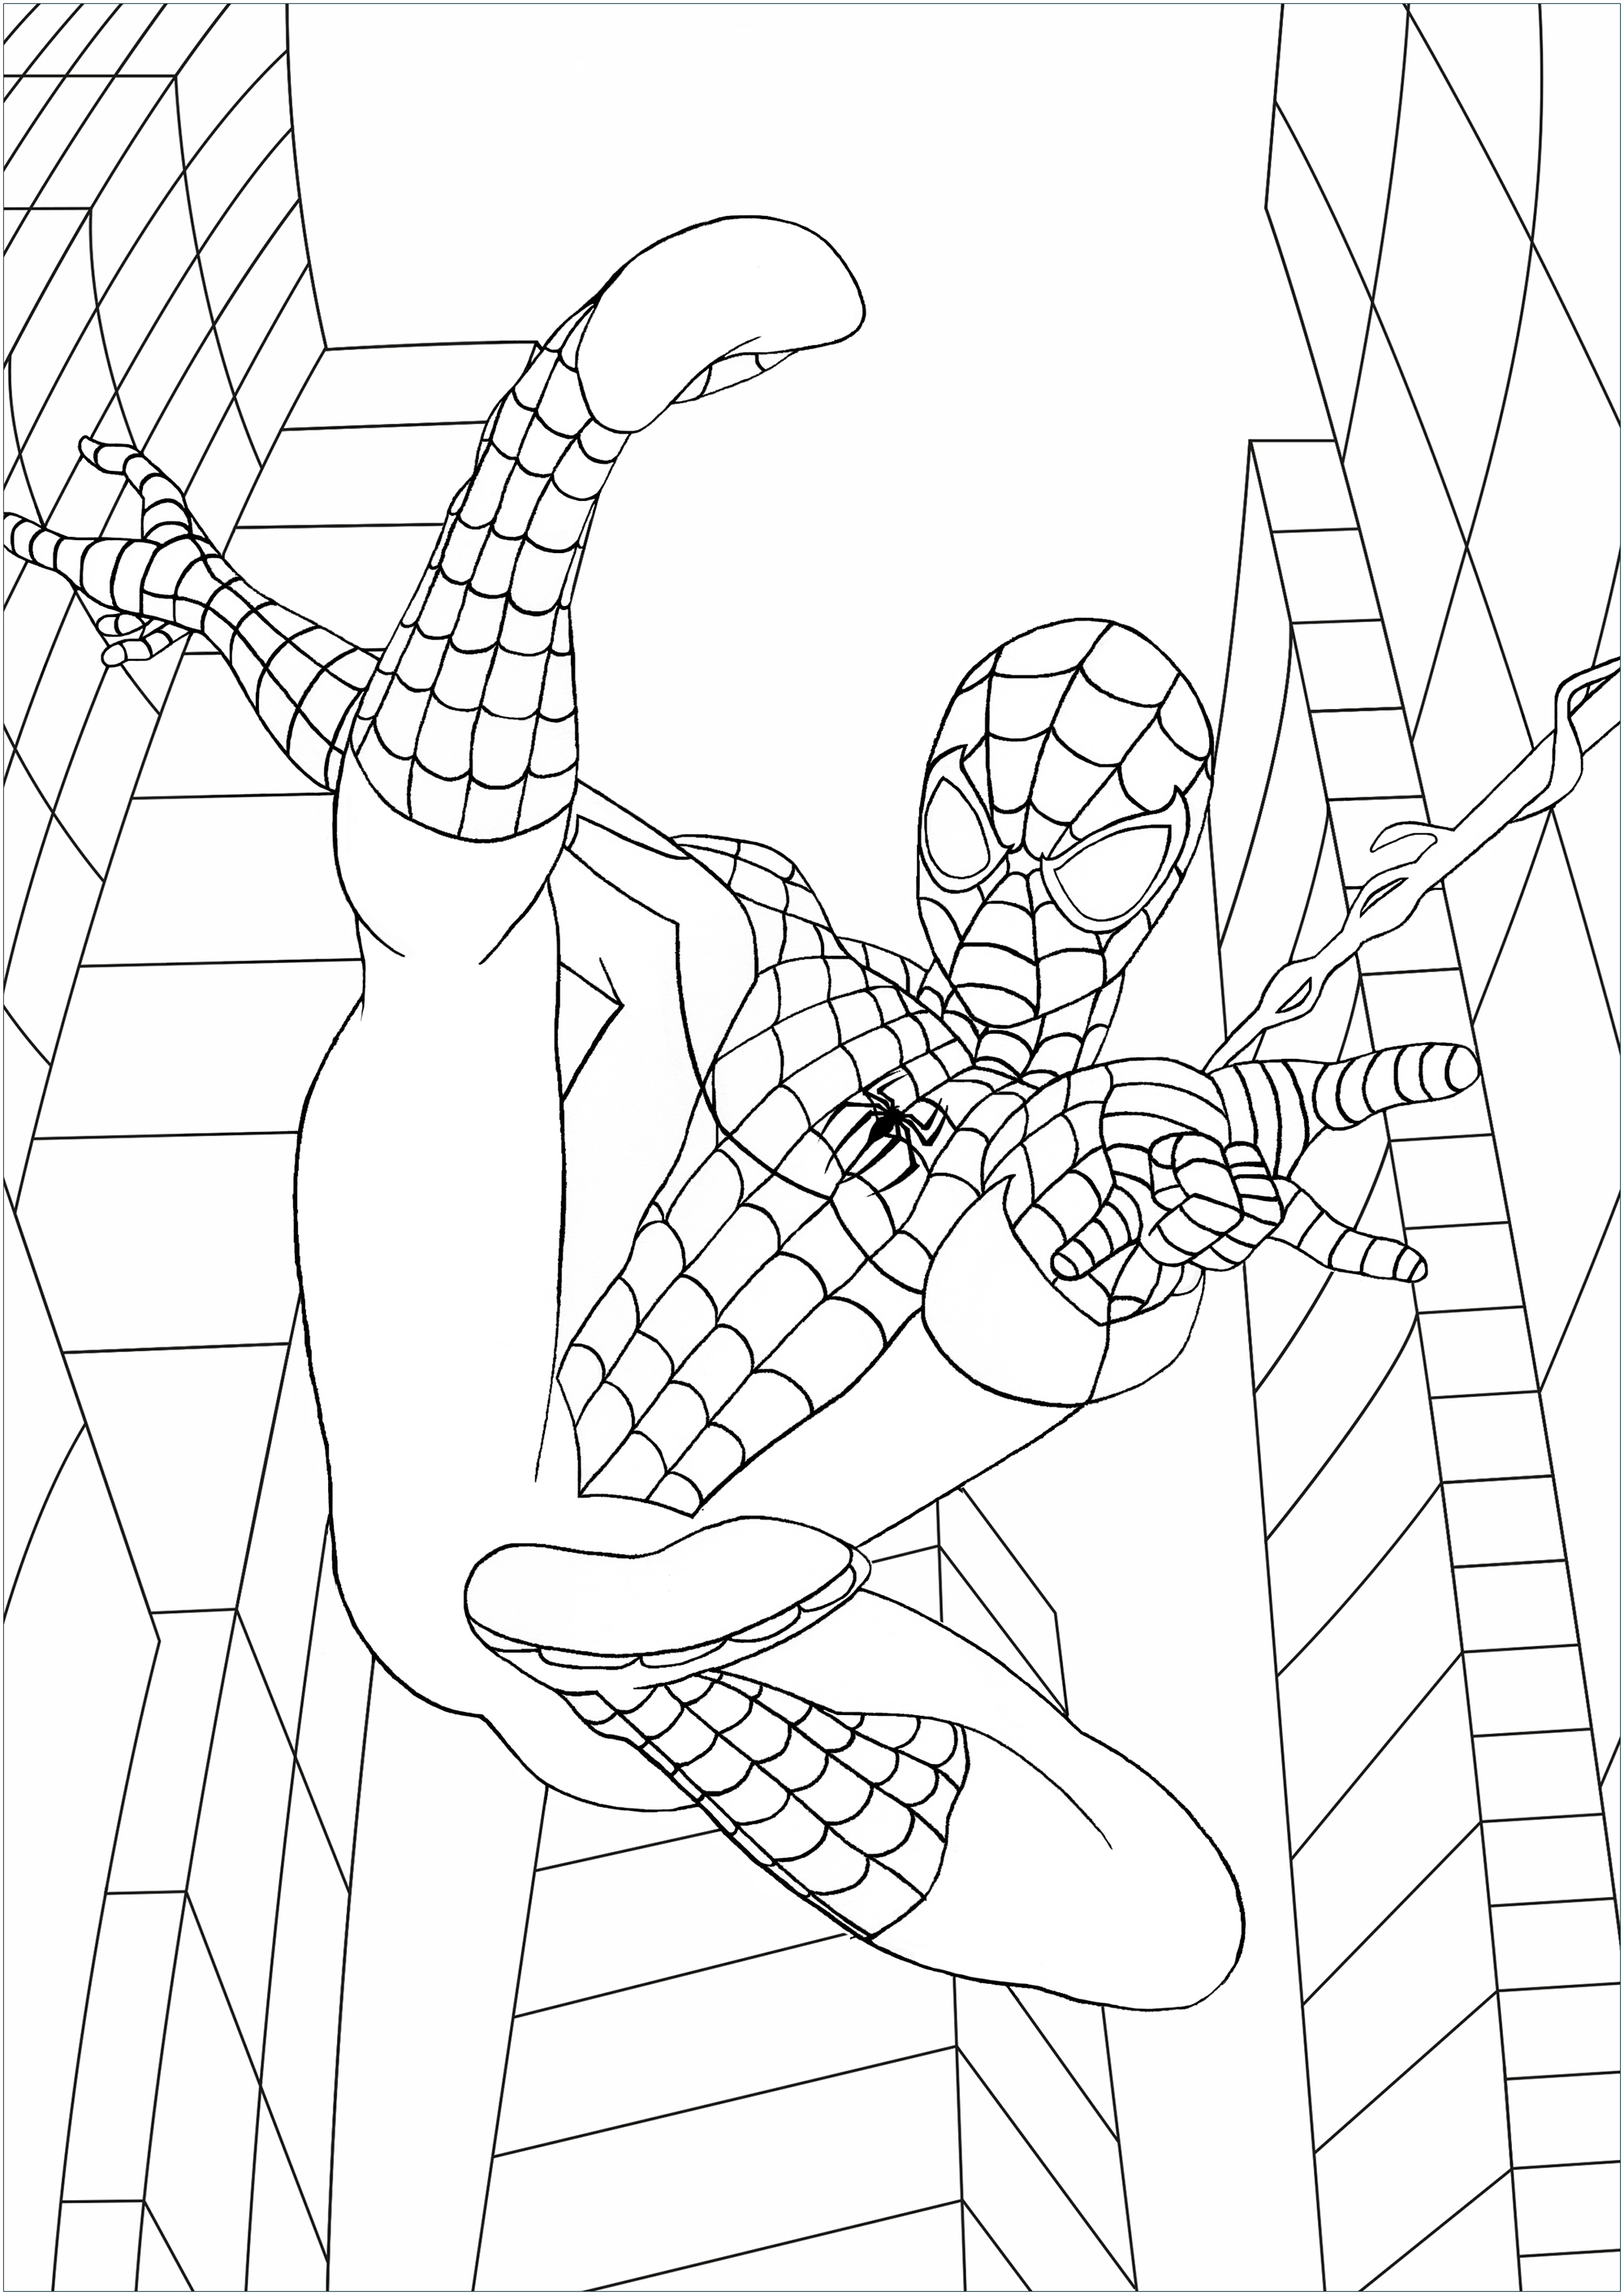 SpiderMan coloring (Fanart) Books Adult Coloring Pages